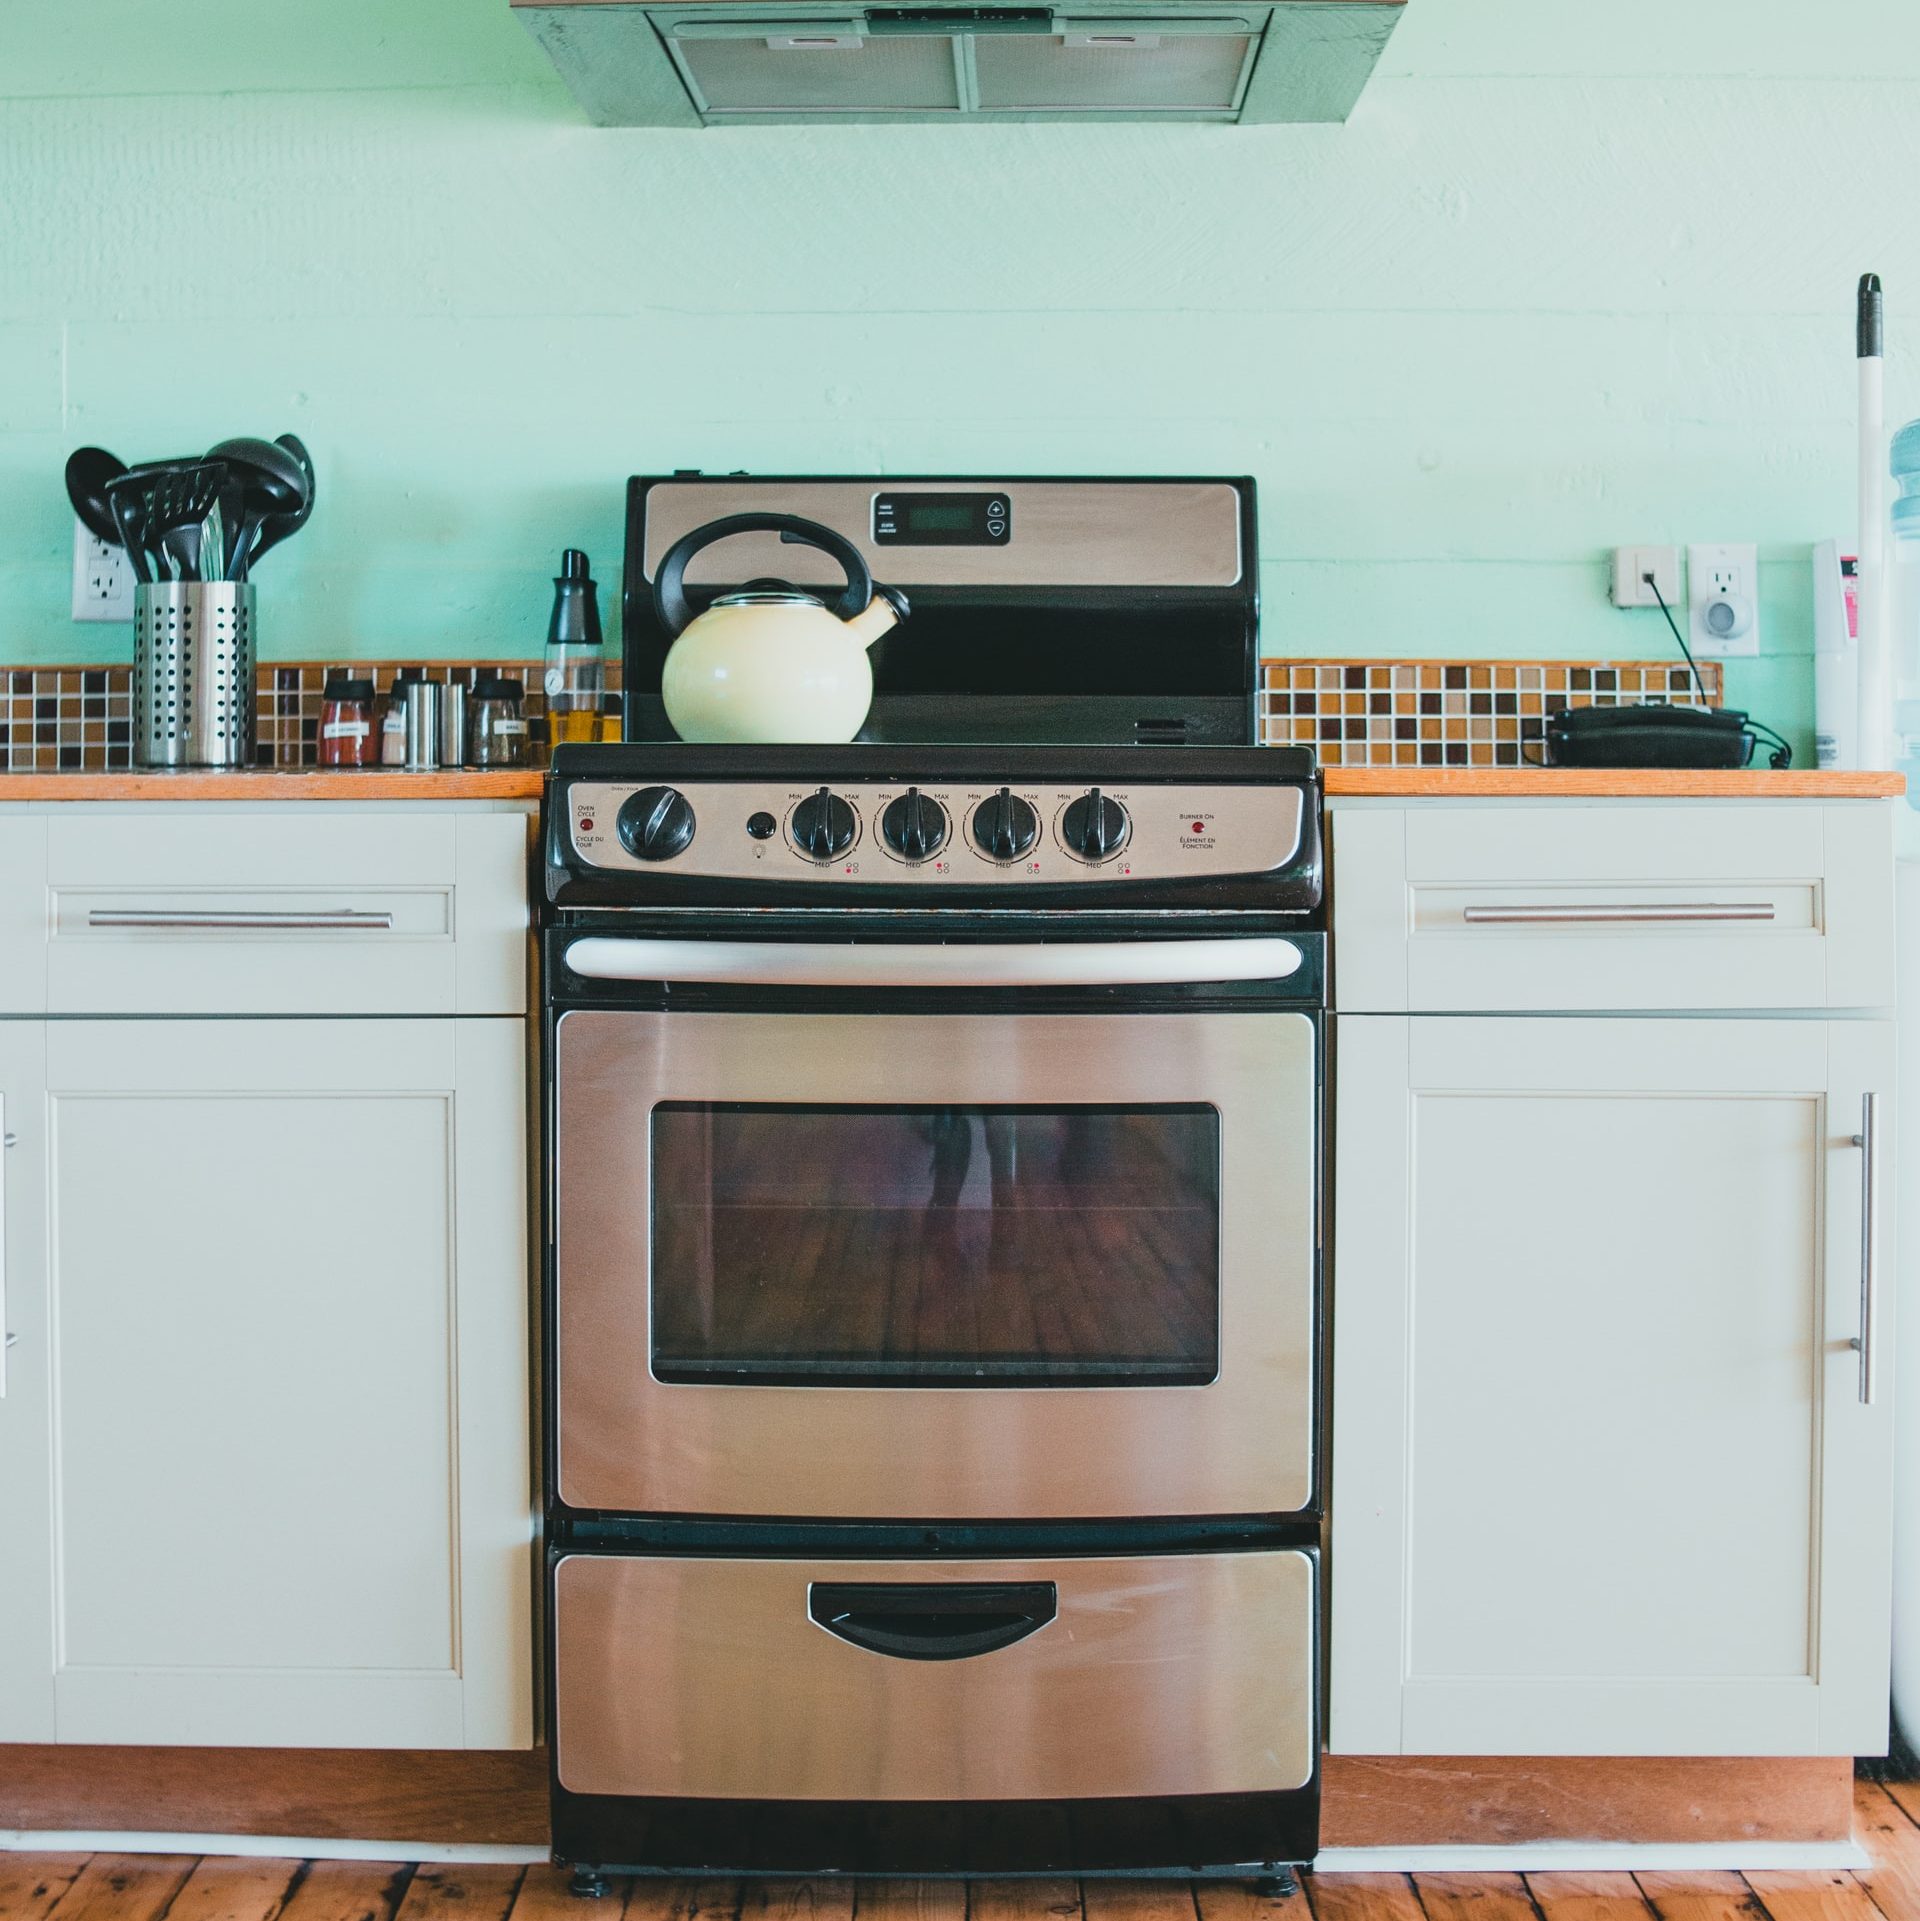 A silver and black stove in a green kitchen